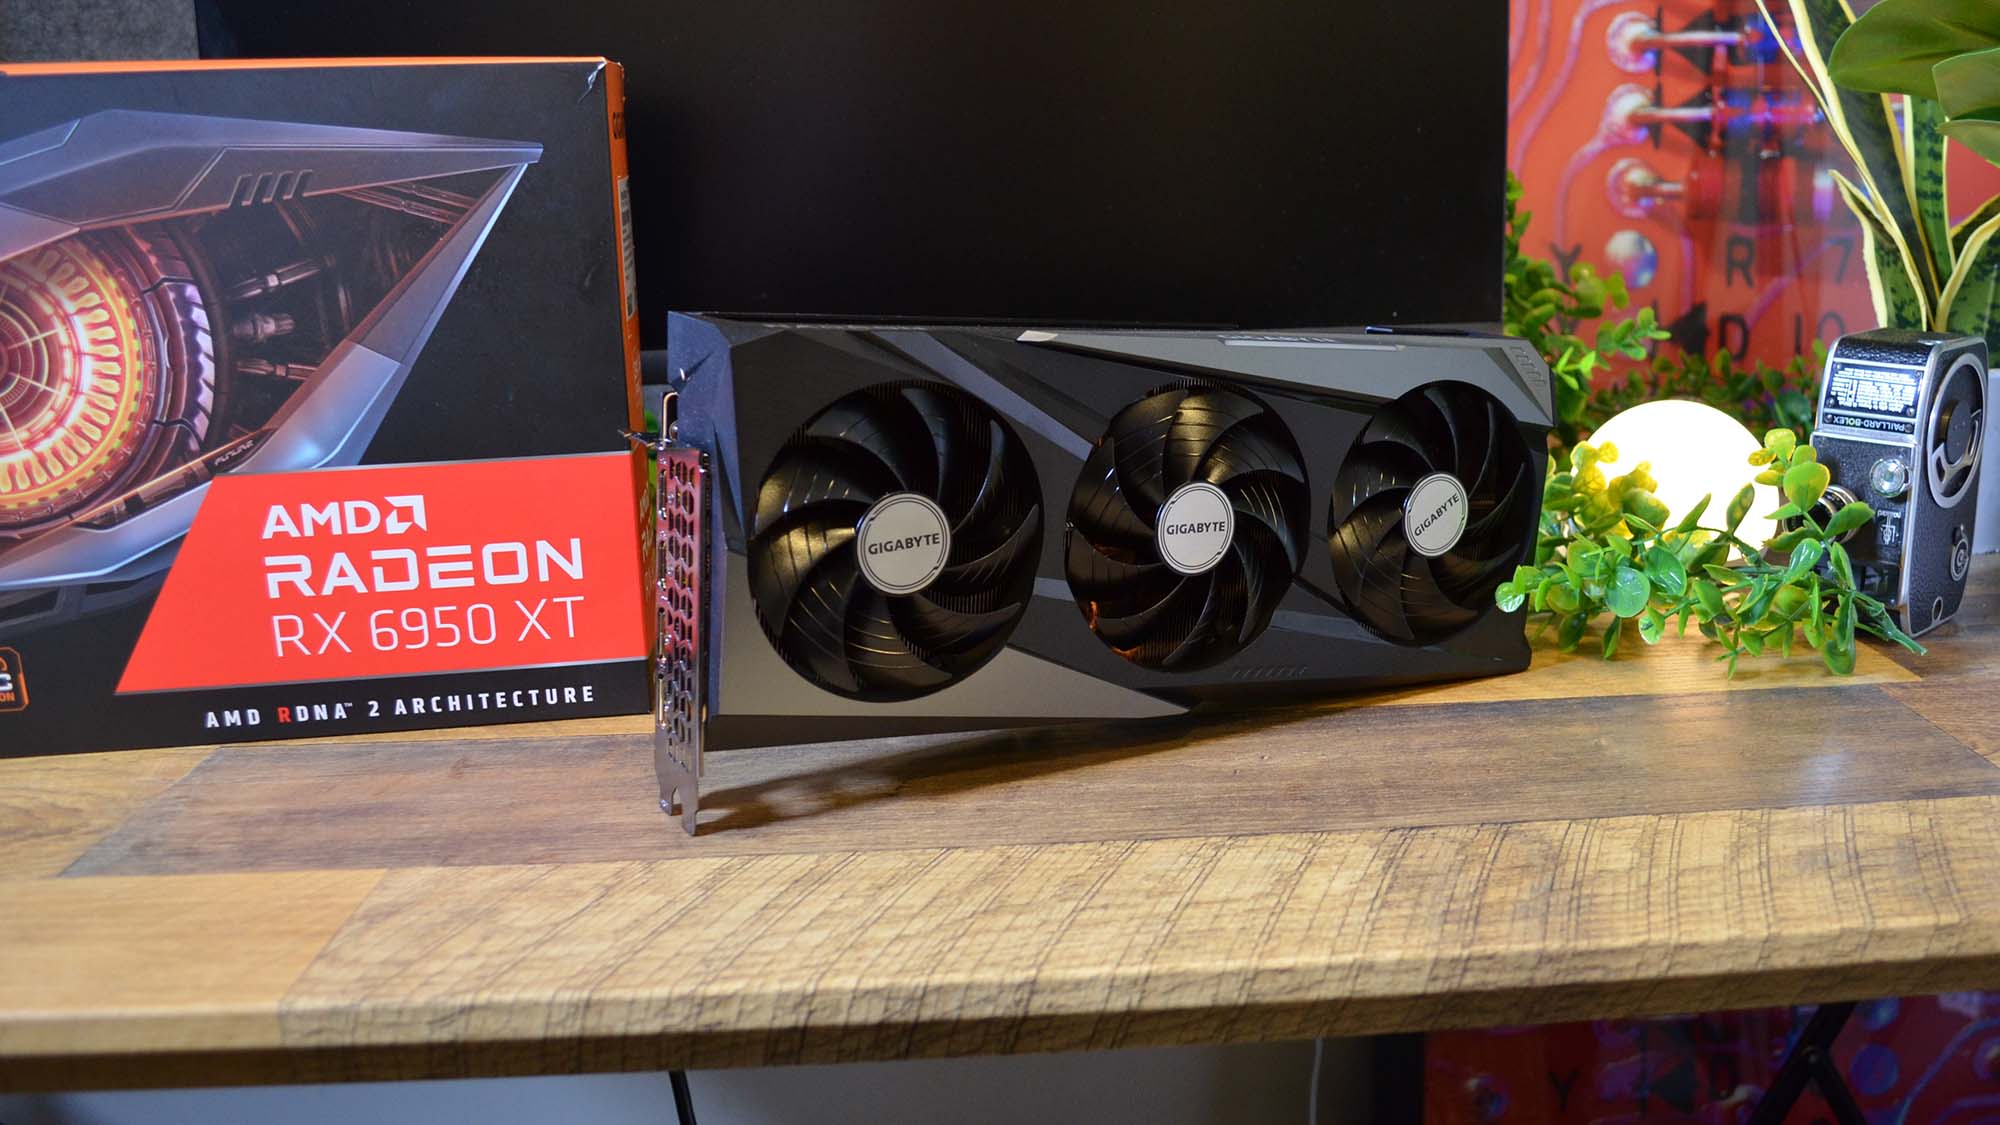 AMD Radeon RX 7800 XT Review - There's Strength, Then There's Weakness –